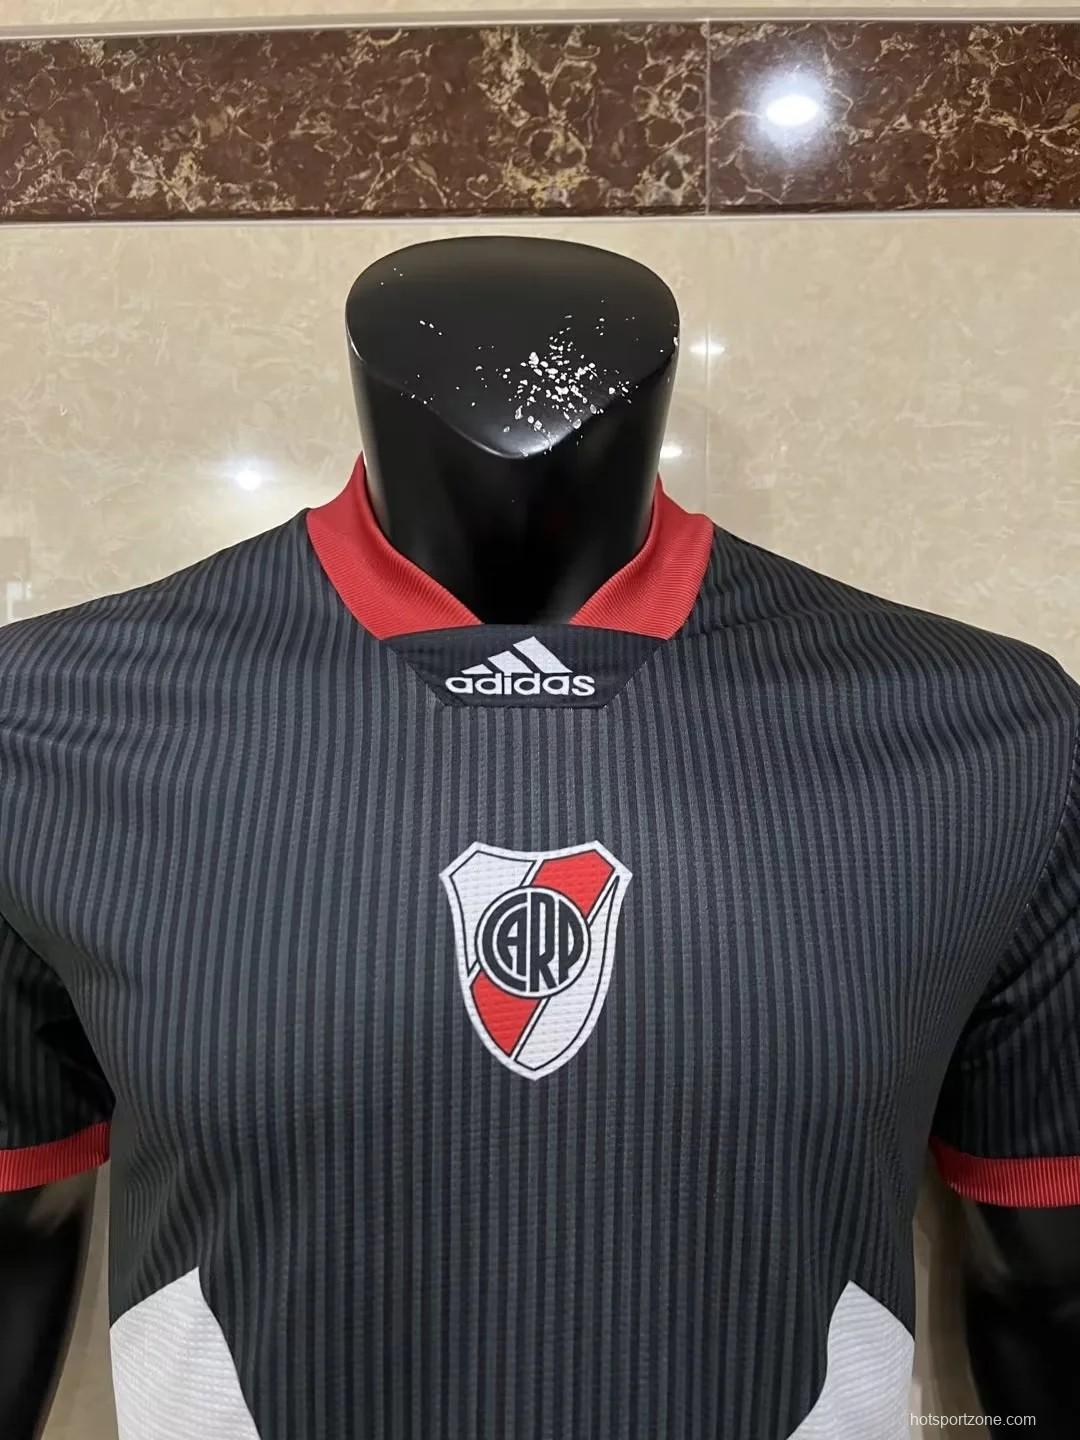 Player Version 22/23 Adidas CA River Plate Icon Black Jersey